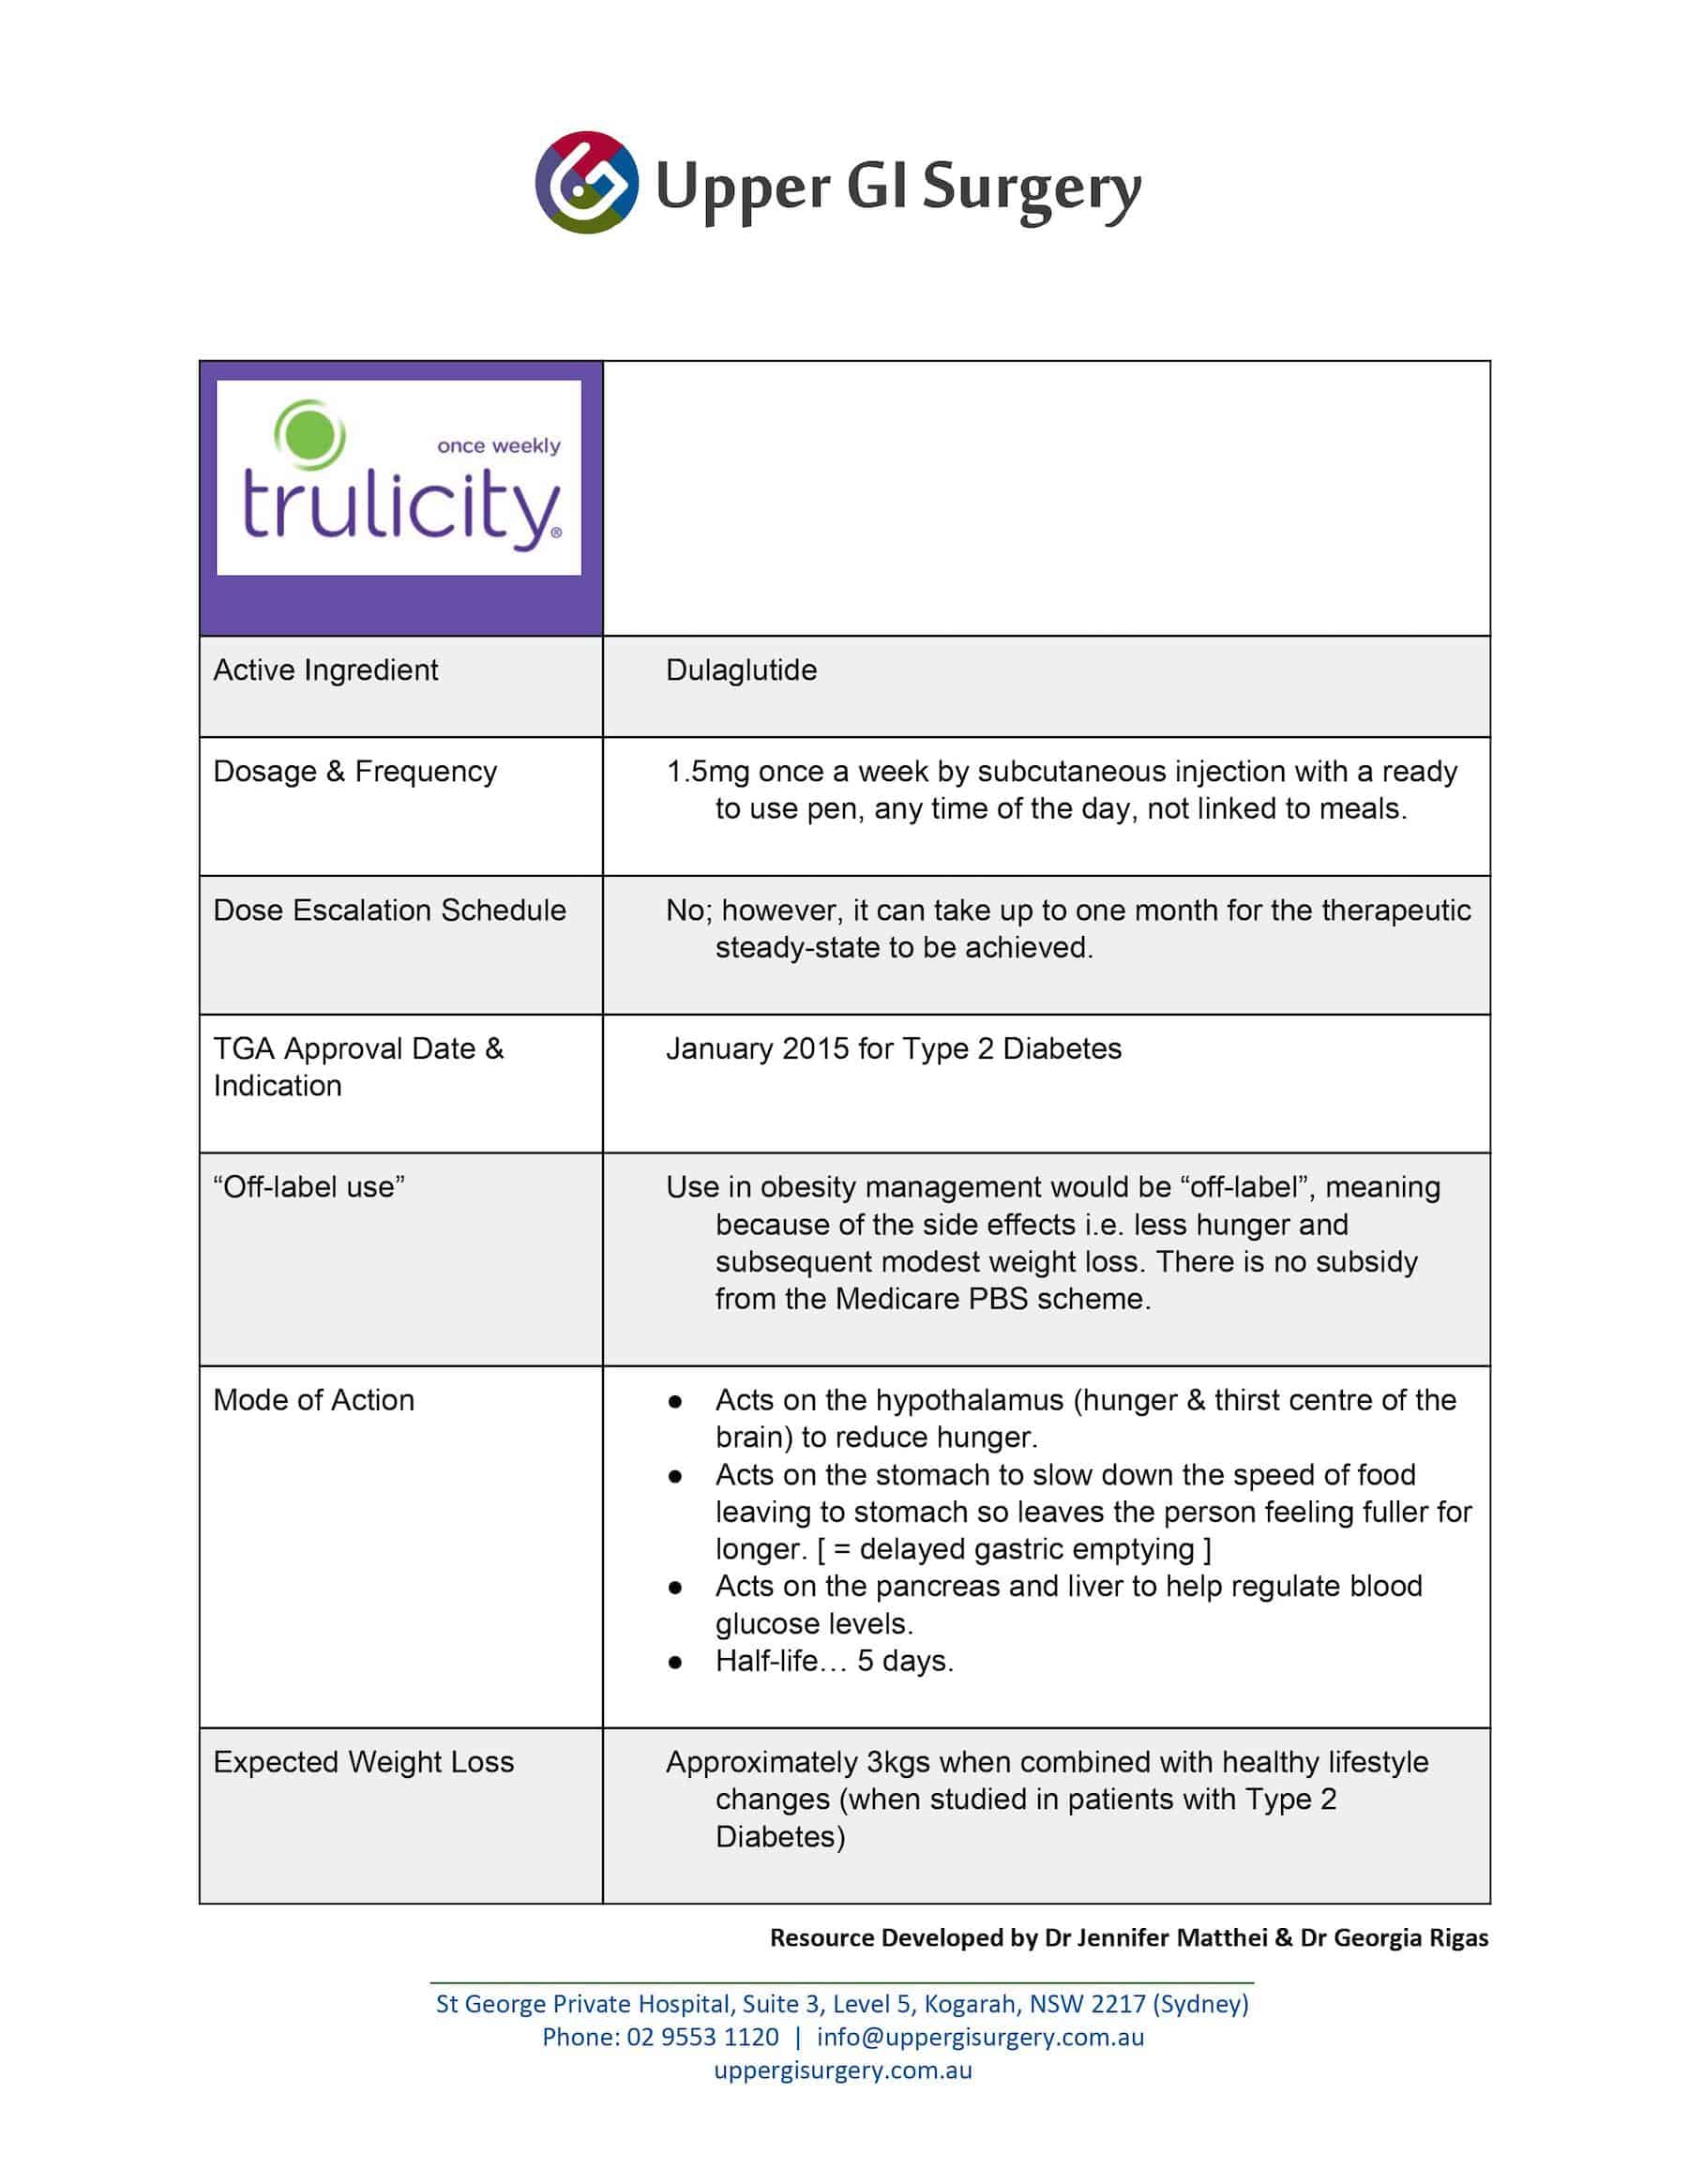 Trulicity information booklet